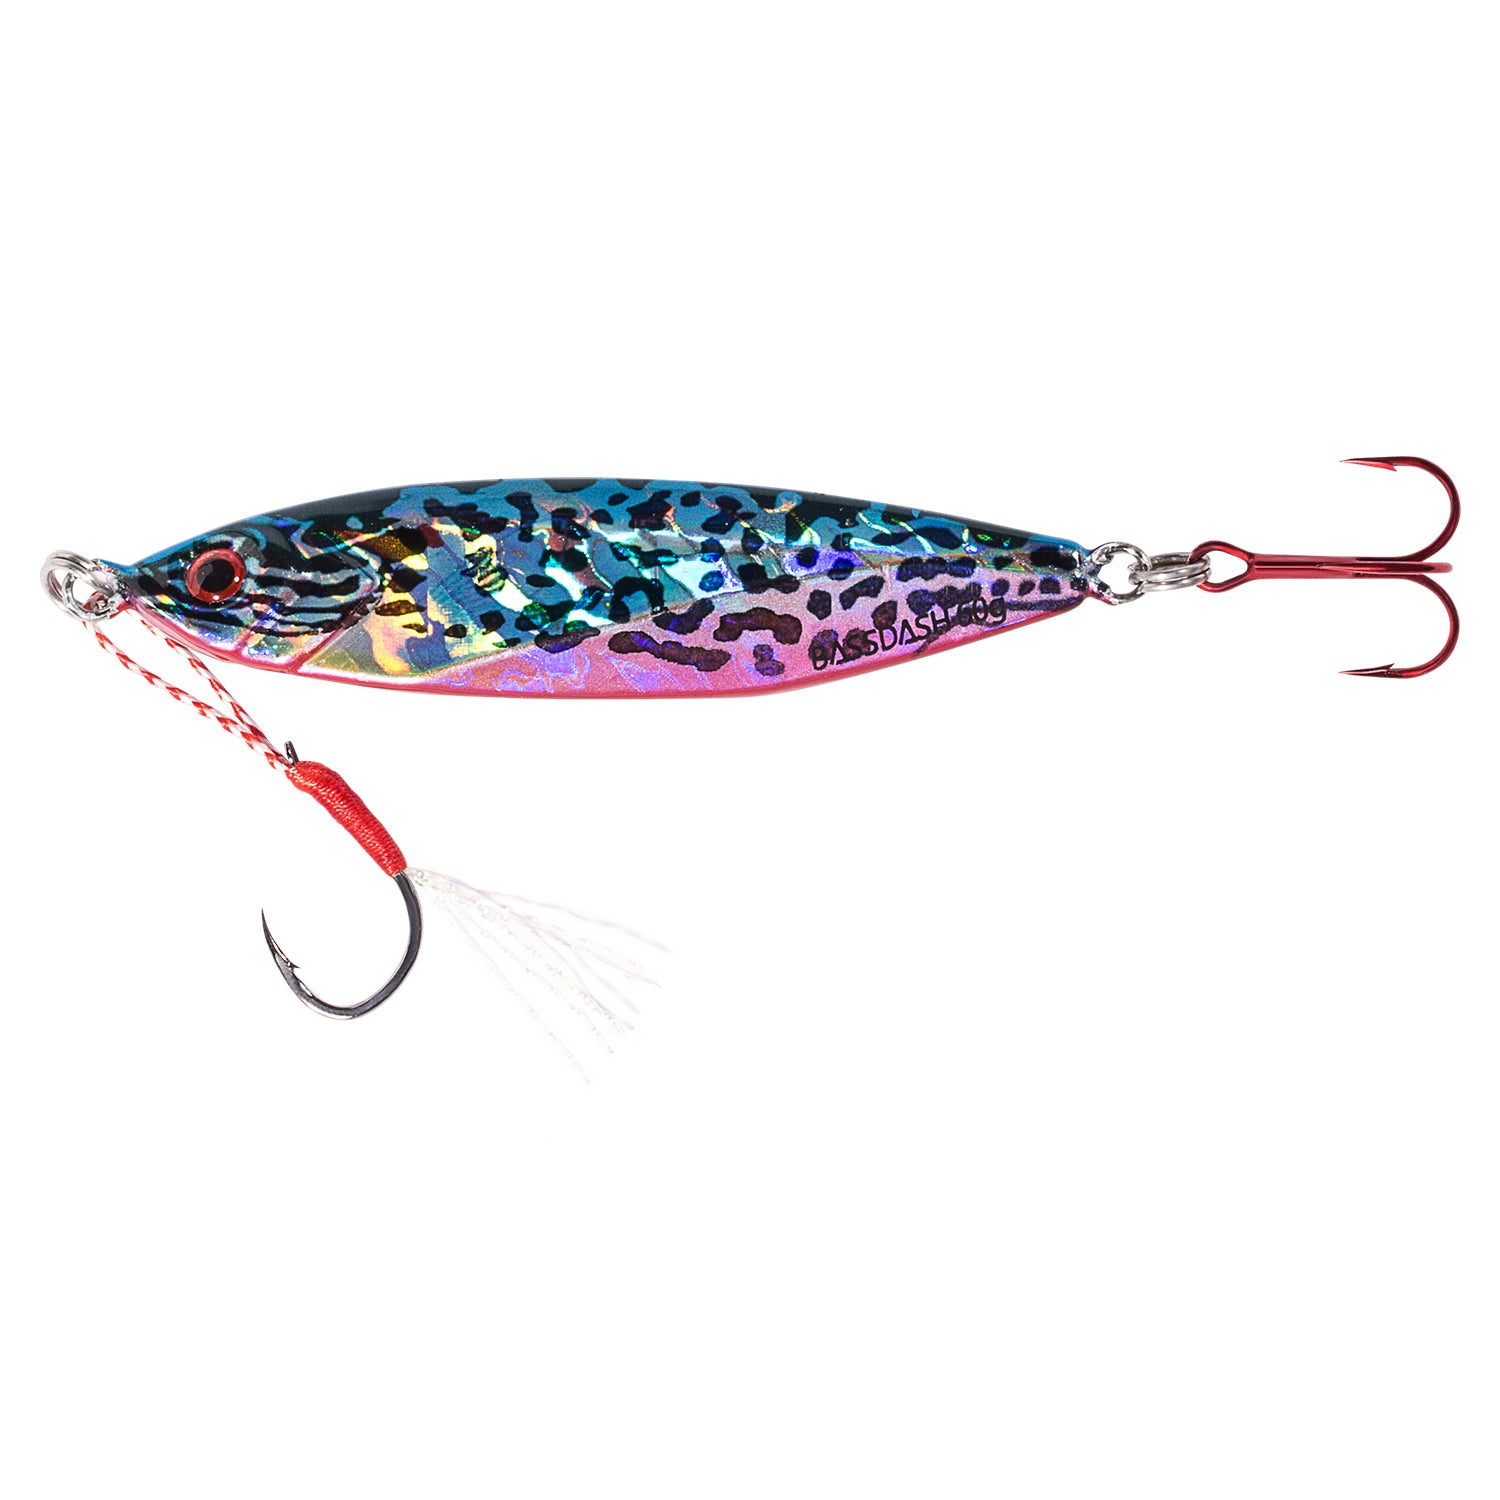 Shadow Vertical Jig Lures 40/60 Grams for Saltwater Freshwater Fishing -  Sunfish / 40g